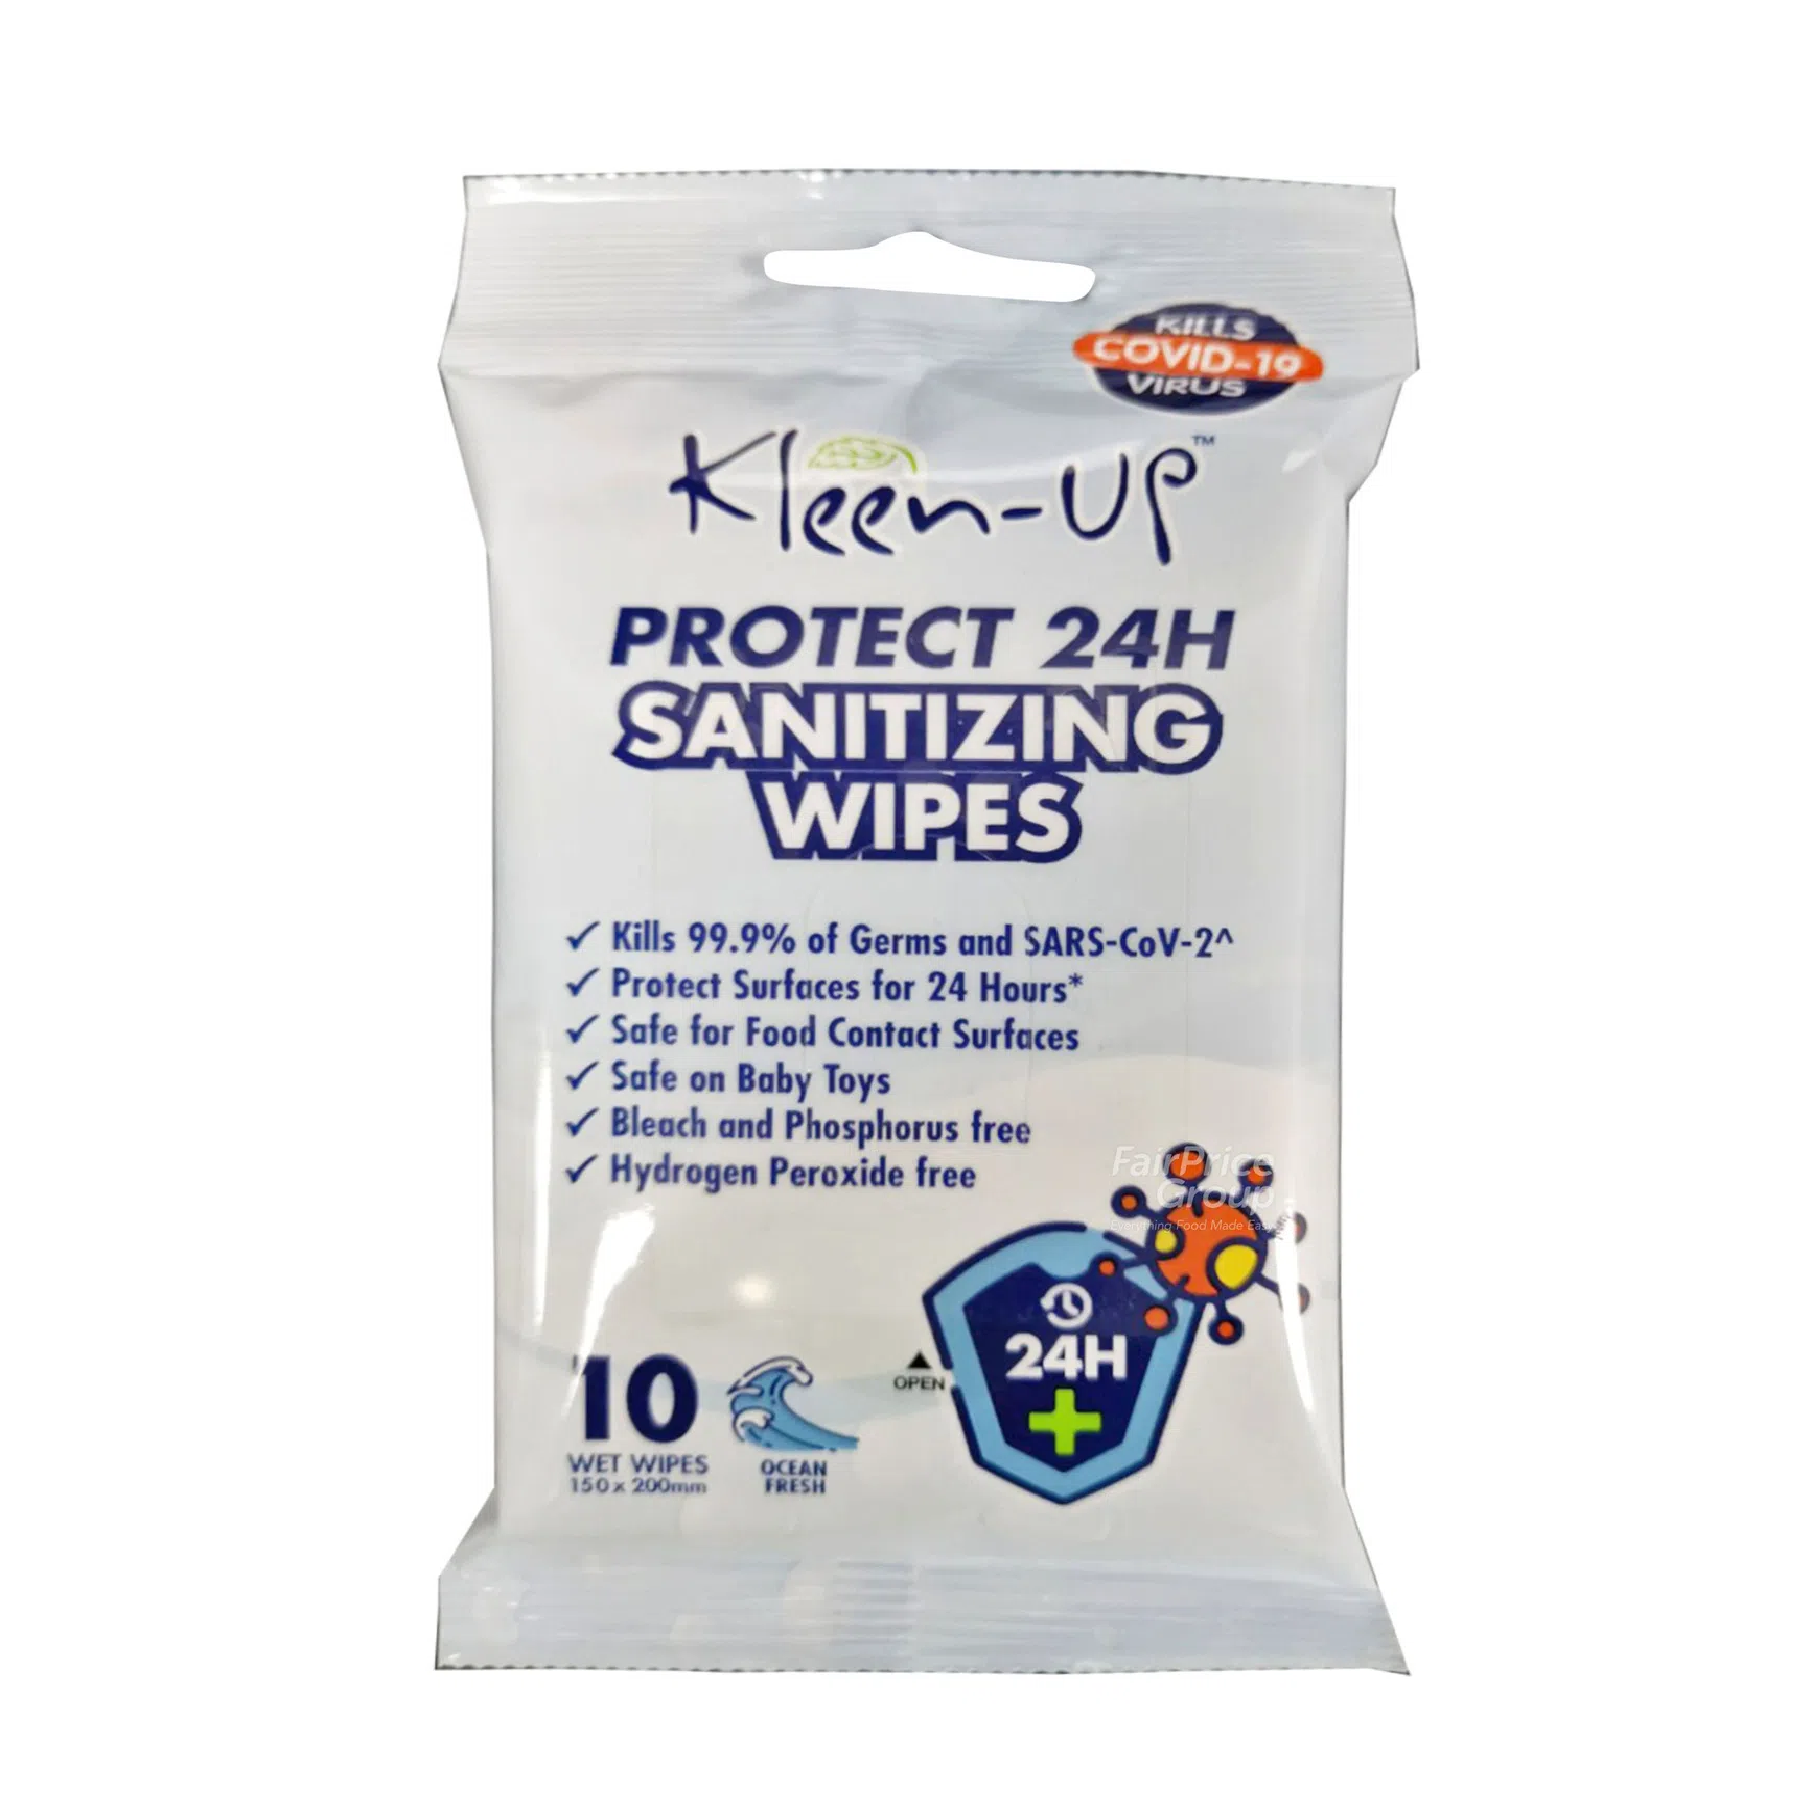 KLEEN-UP PROTECT 24H Sanitizing Wipes 10 SHEETS/PACK